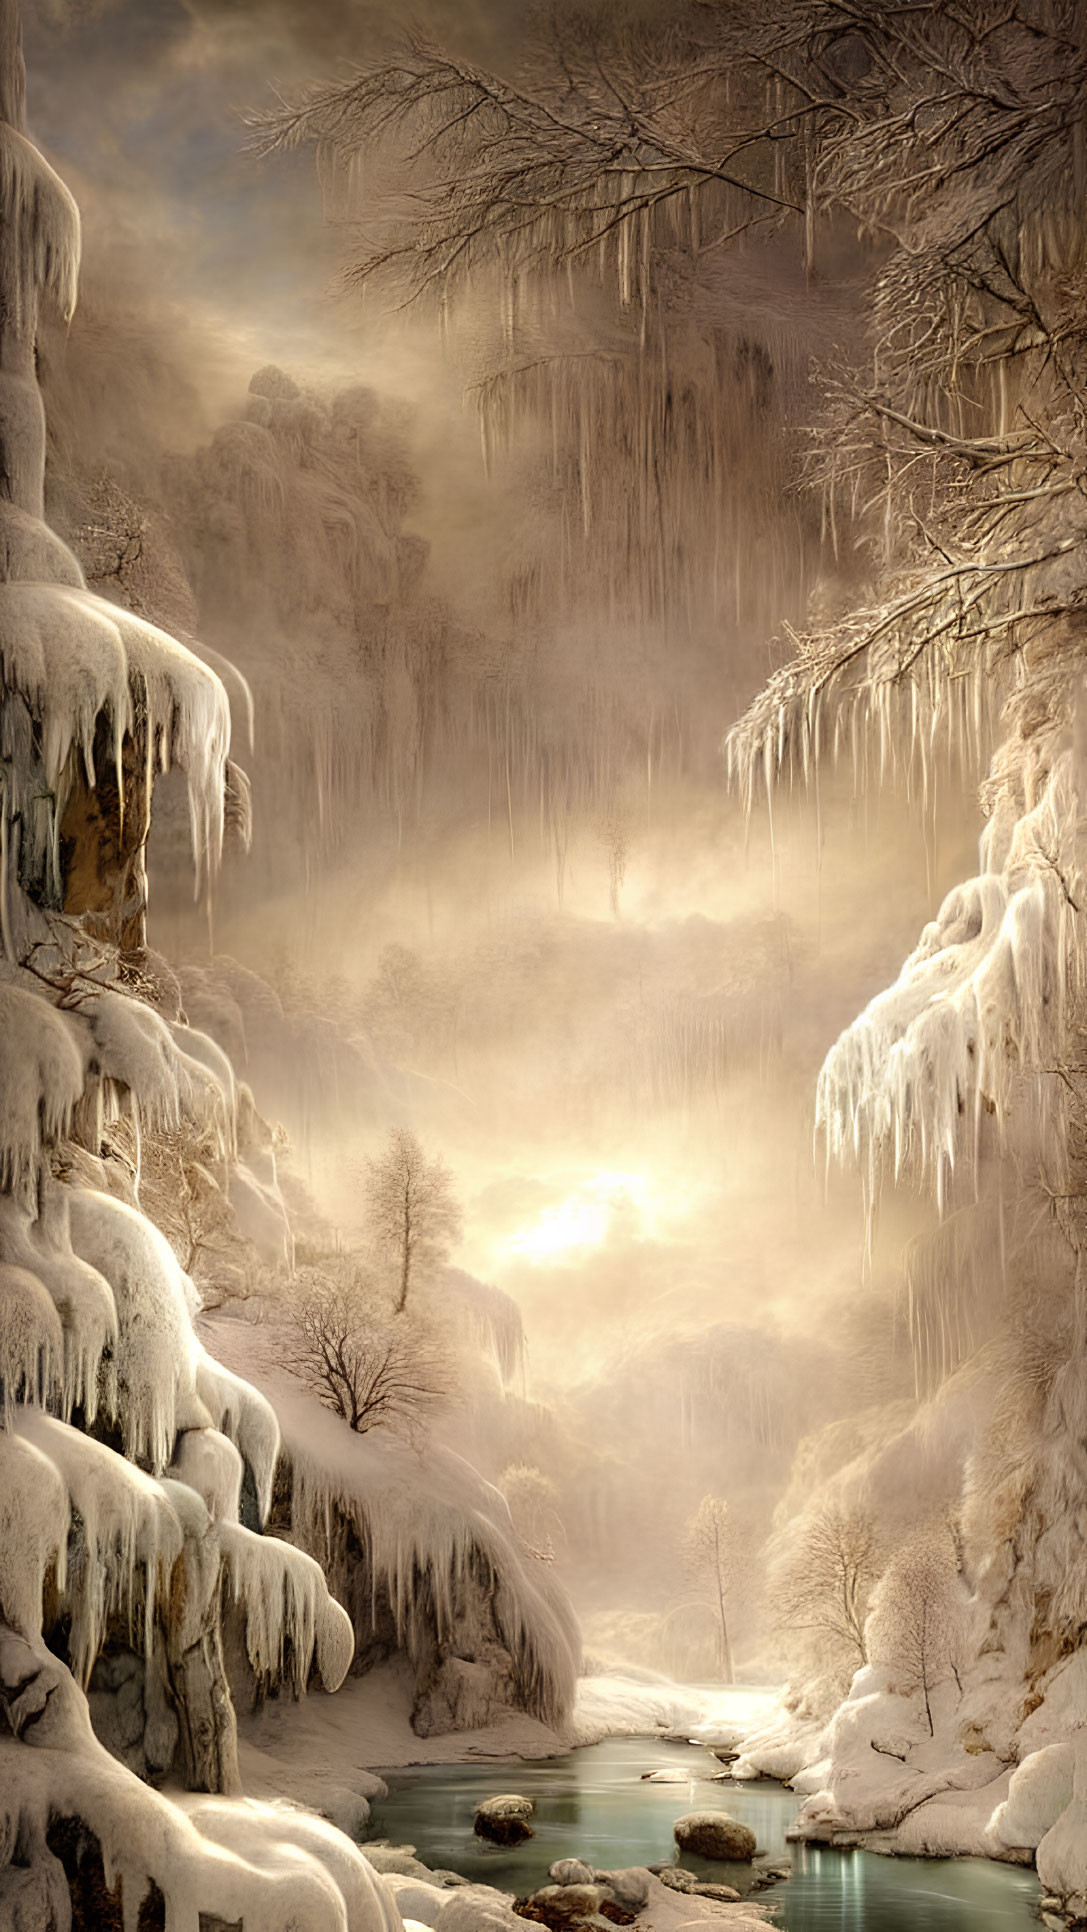 Snow-covered trees, icicles, and a gentle river in a serene winter landscape